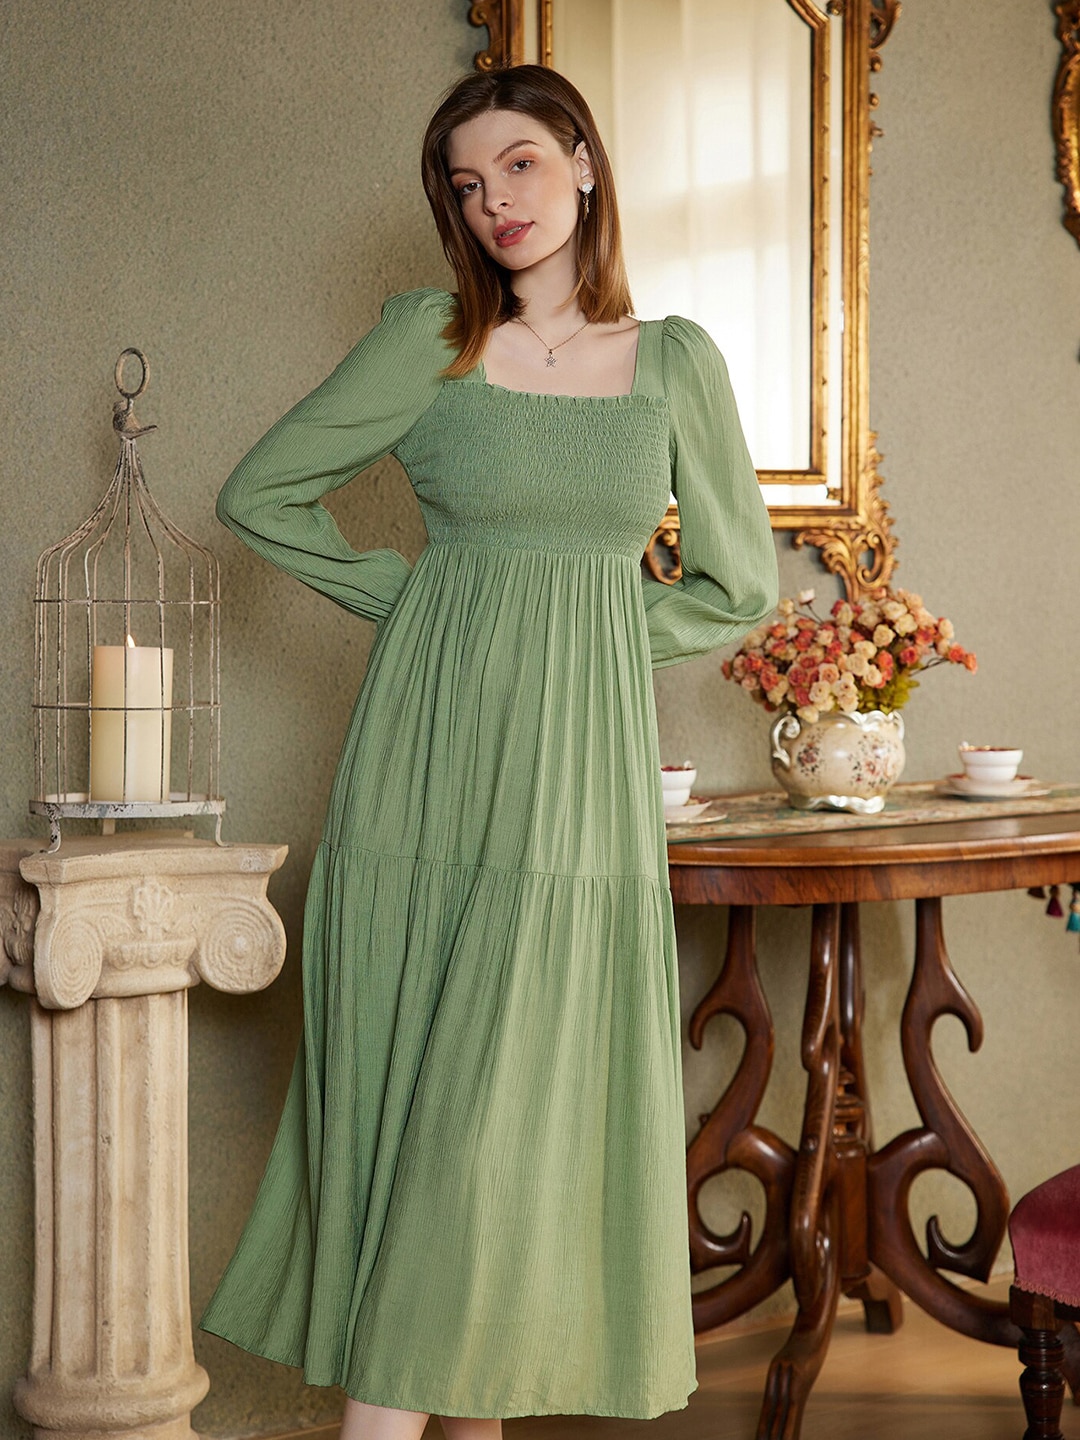 URBANIC Women Green Maxi A-Line Dress Price in India, Full Specifications &  Offers | DTashion.com